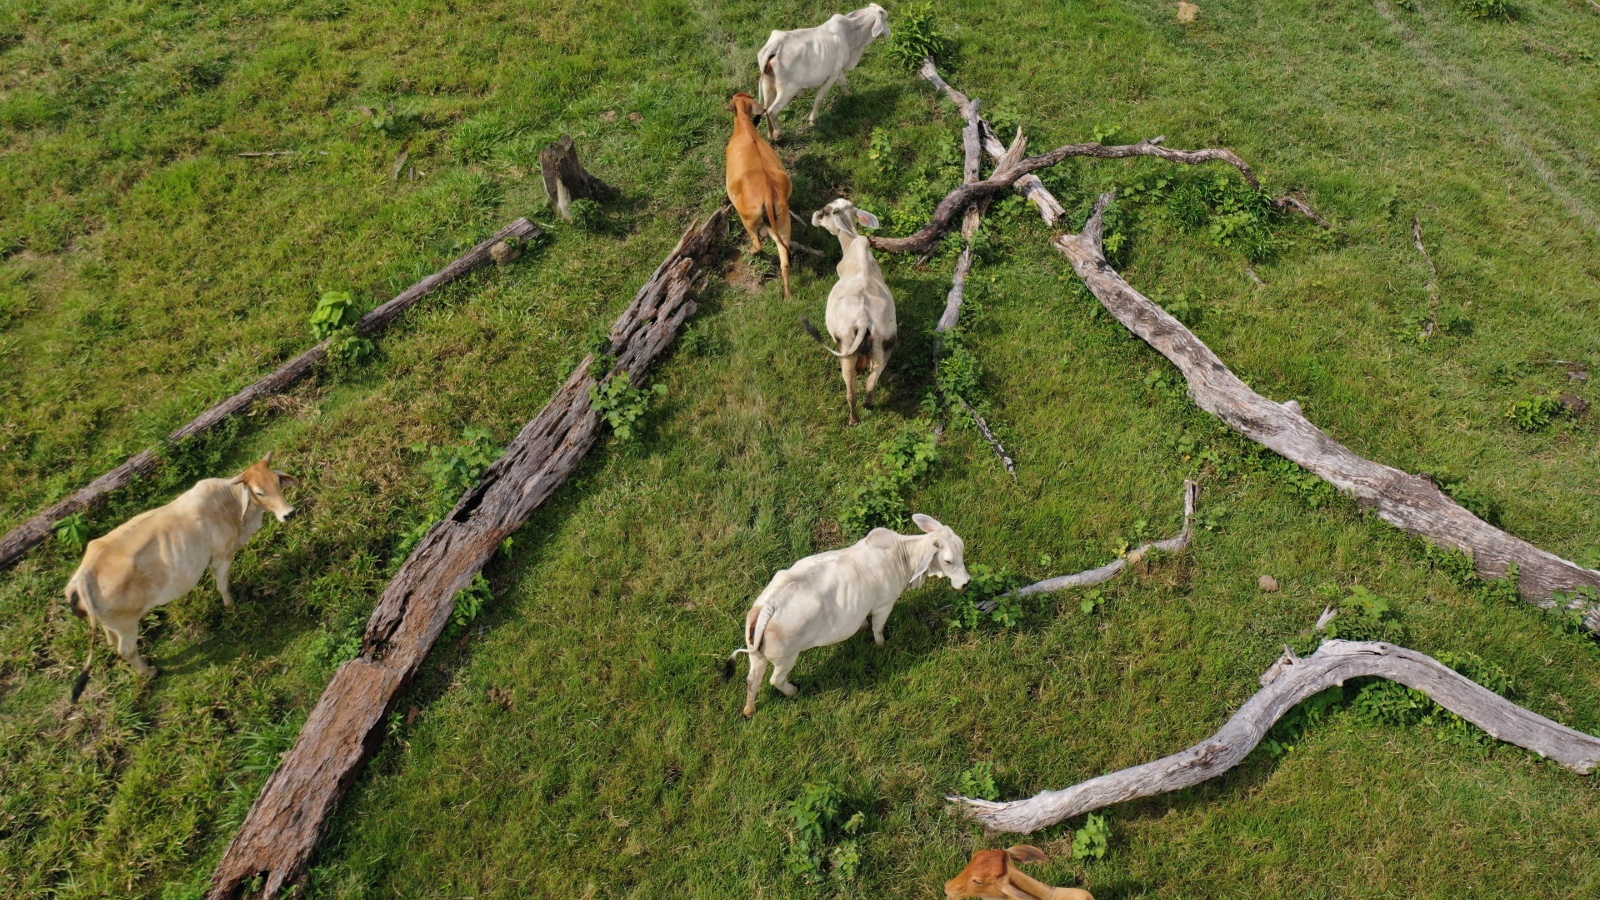 Cattle graze next to fallen trees on a farm in Colombia, after a forest was cut down.